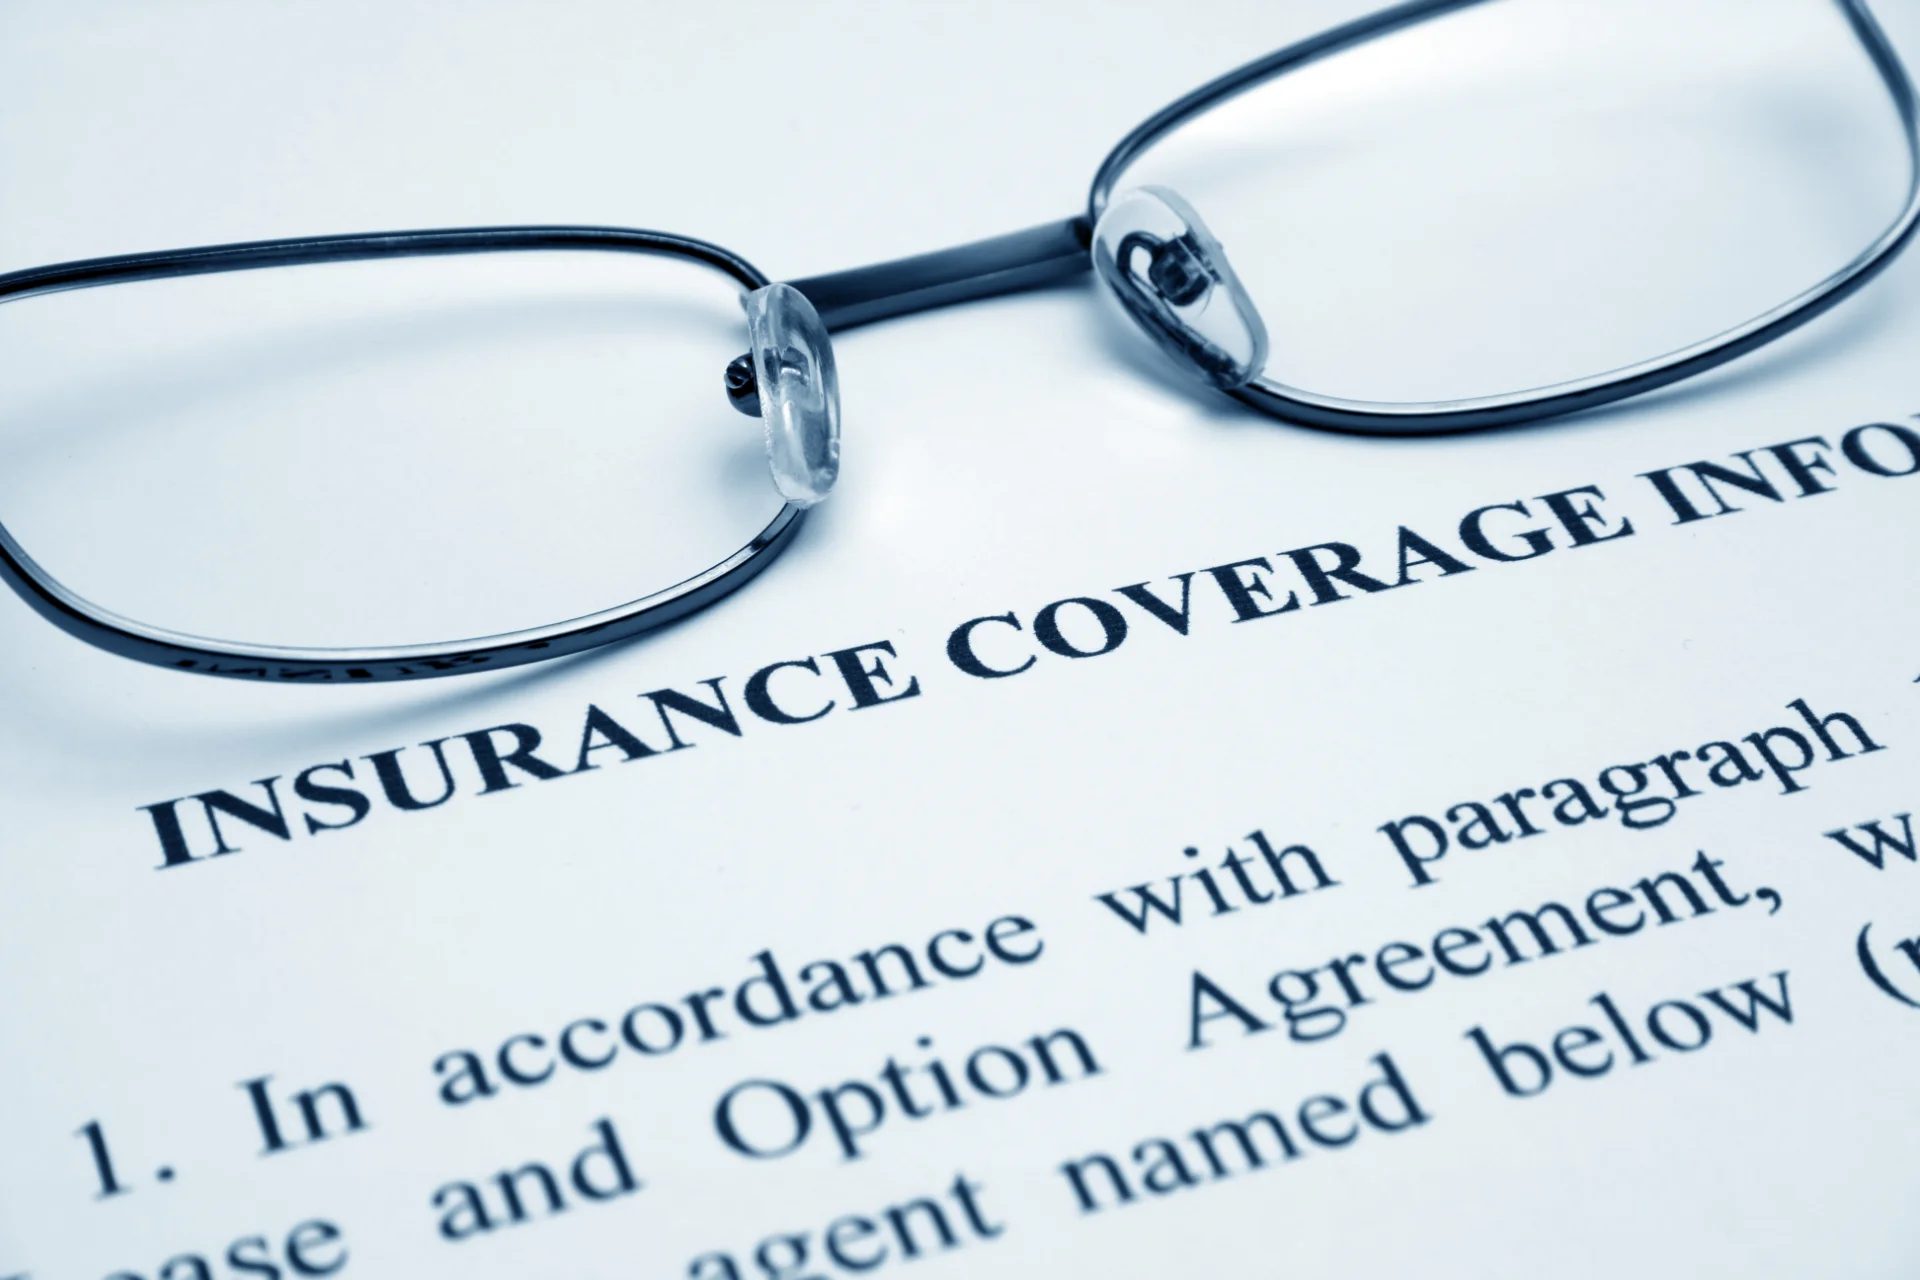 Papers of motorcycle insurance coverage